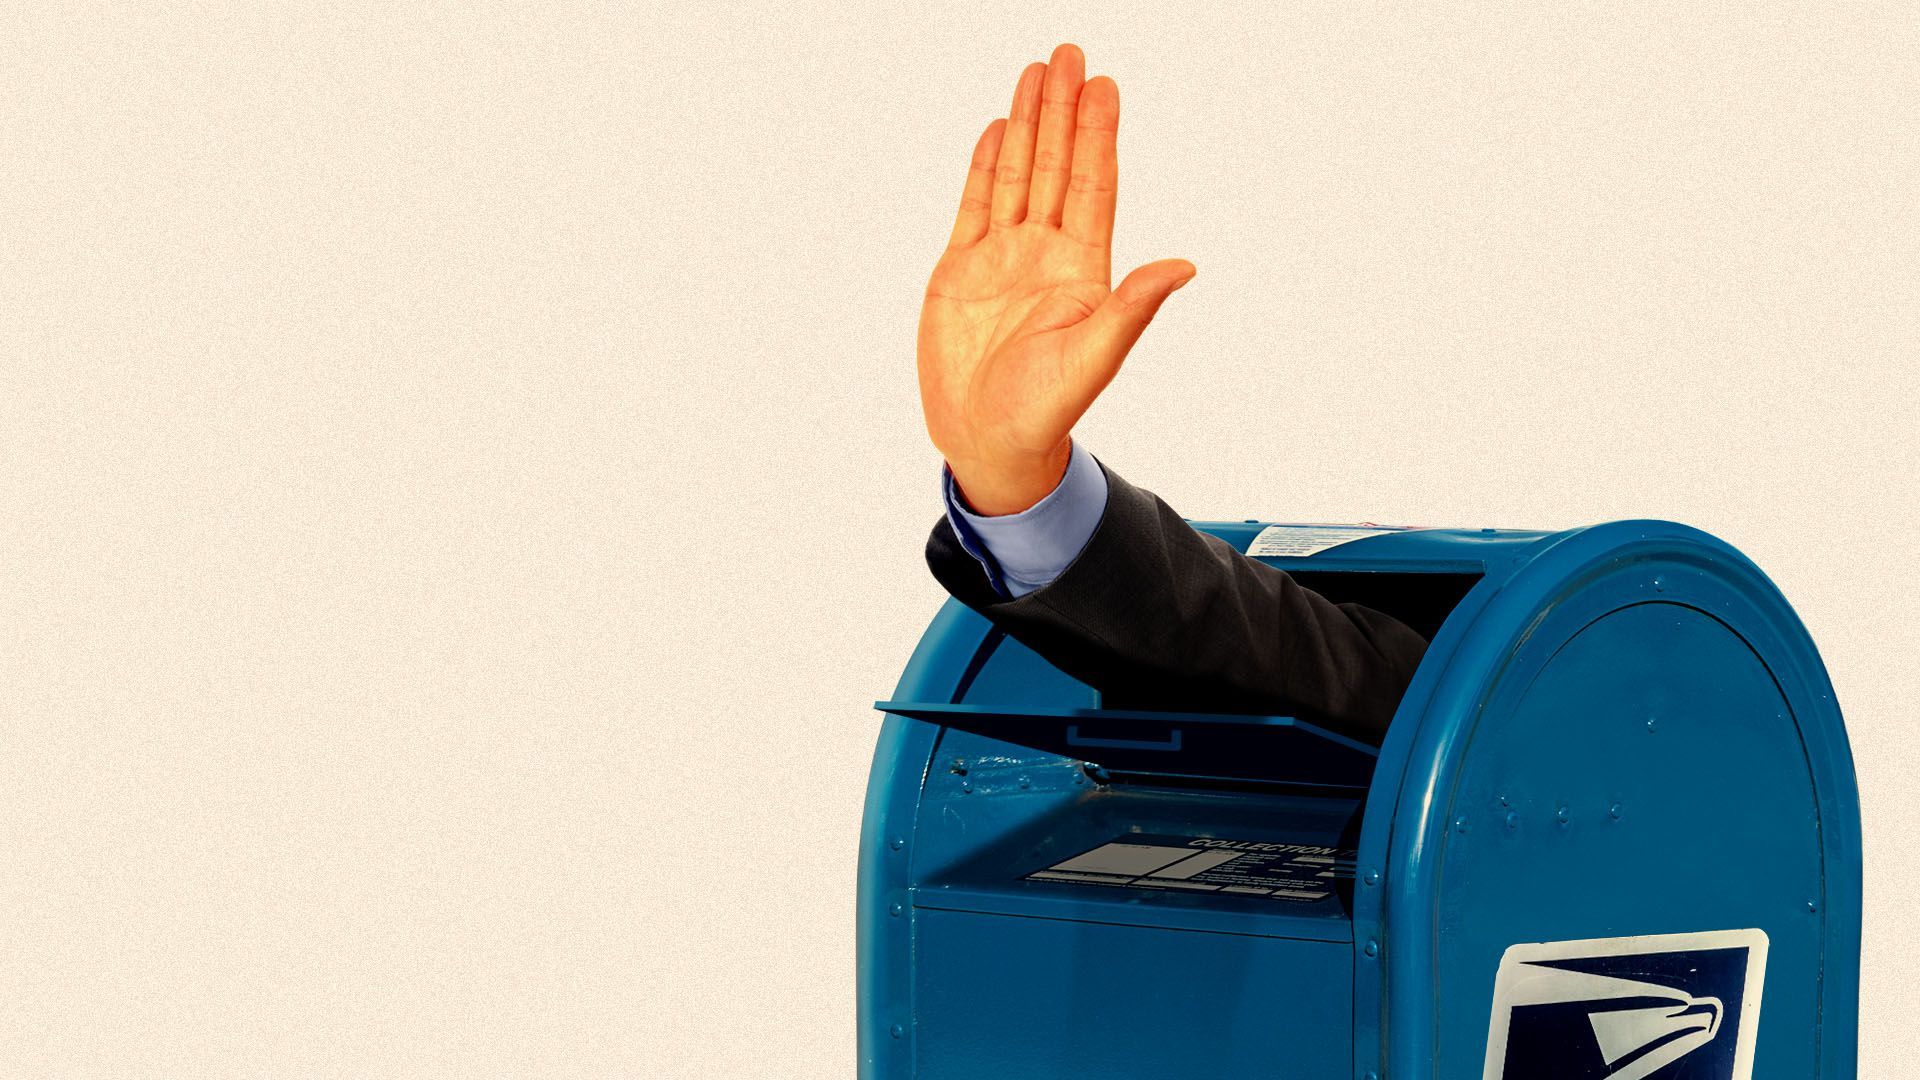 Illustration of a hand making a stopping motion coming out of a USPS mailbox